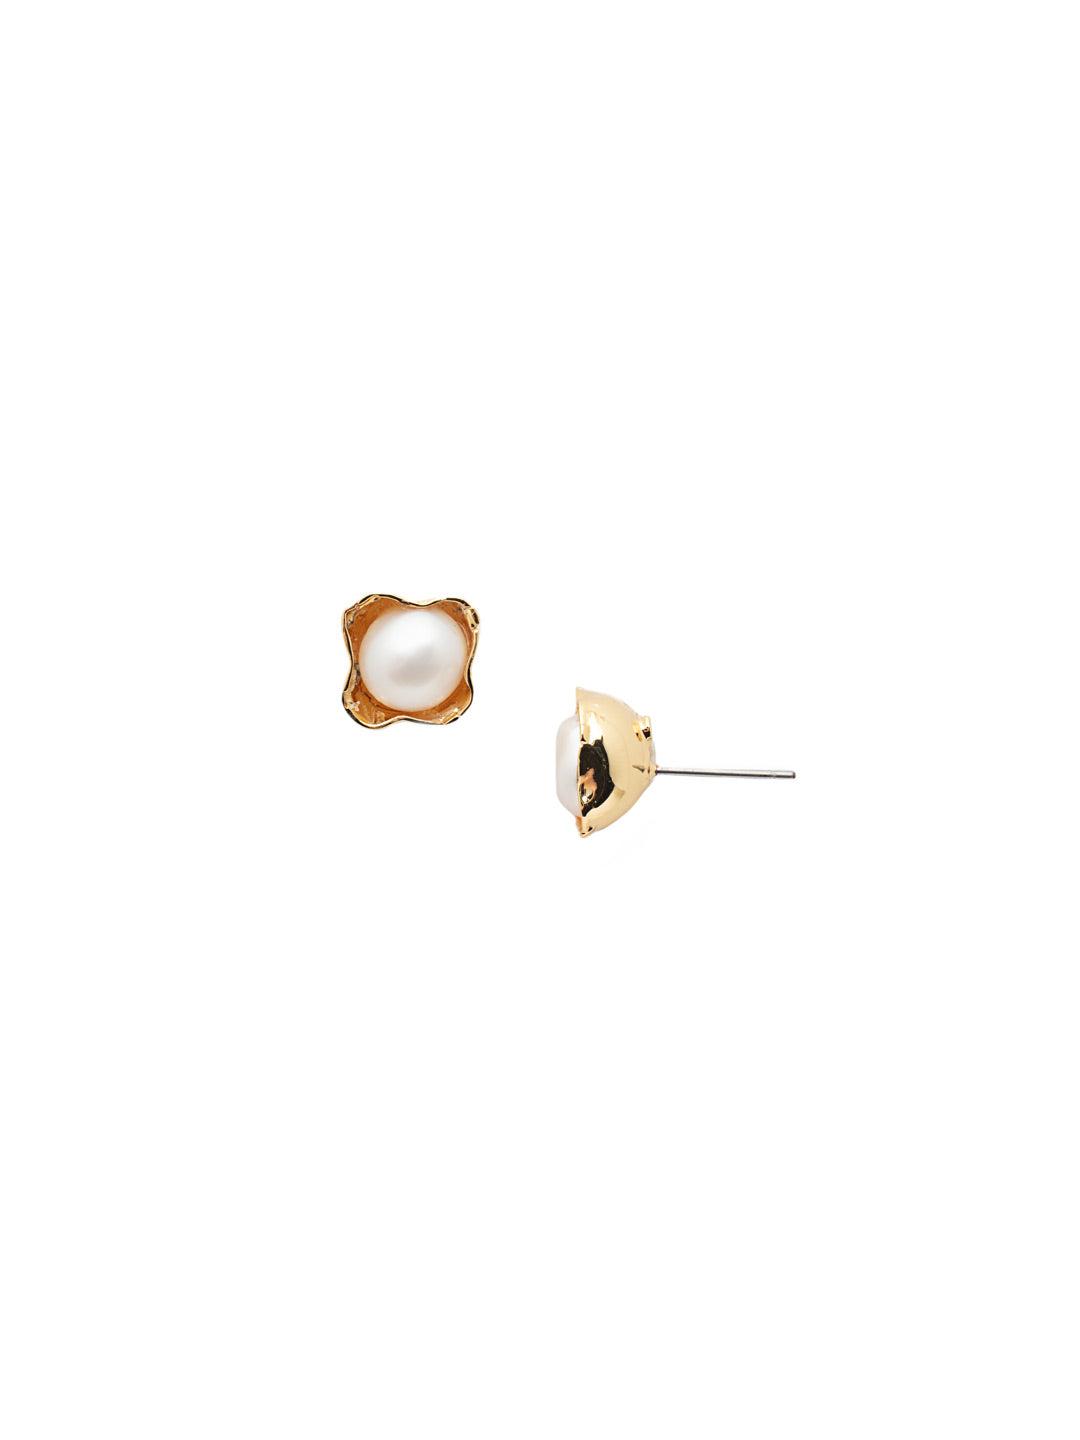 Karie Stud Earring - 4EEV8BGMDP - <p>The Karie Stud Earrings accentuate a single freshwater pearl within a ruffle of metal; perfect for dressing up or down. From Sorrelli's Modern Pearl collection in our Bright Gold-tone finish.</p>